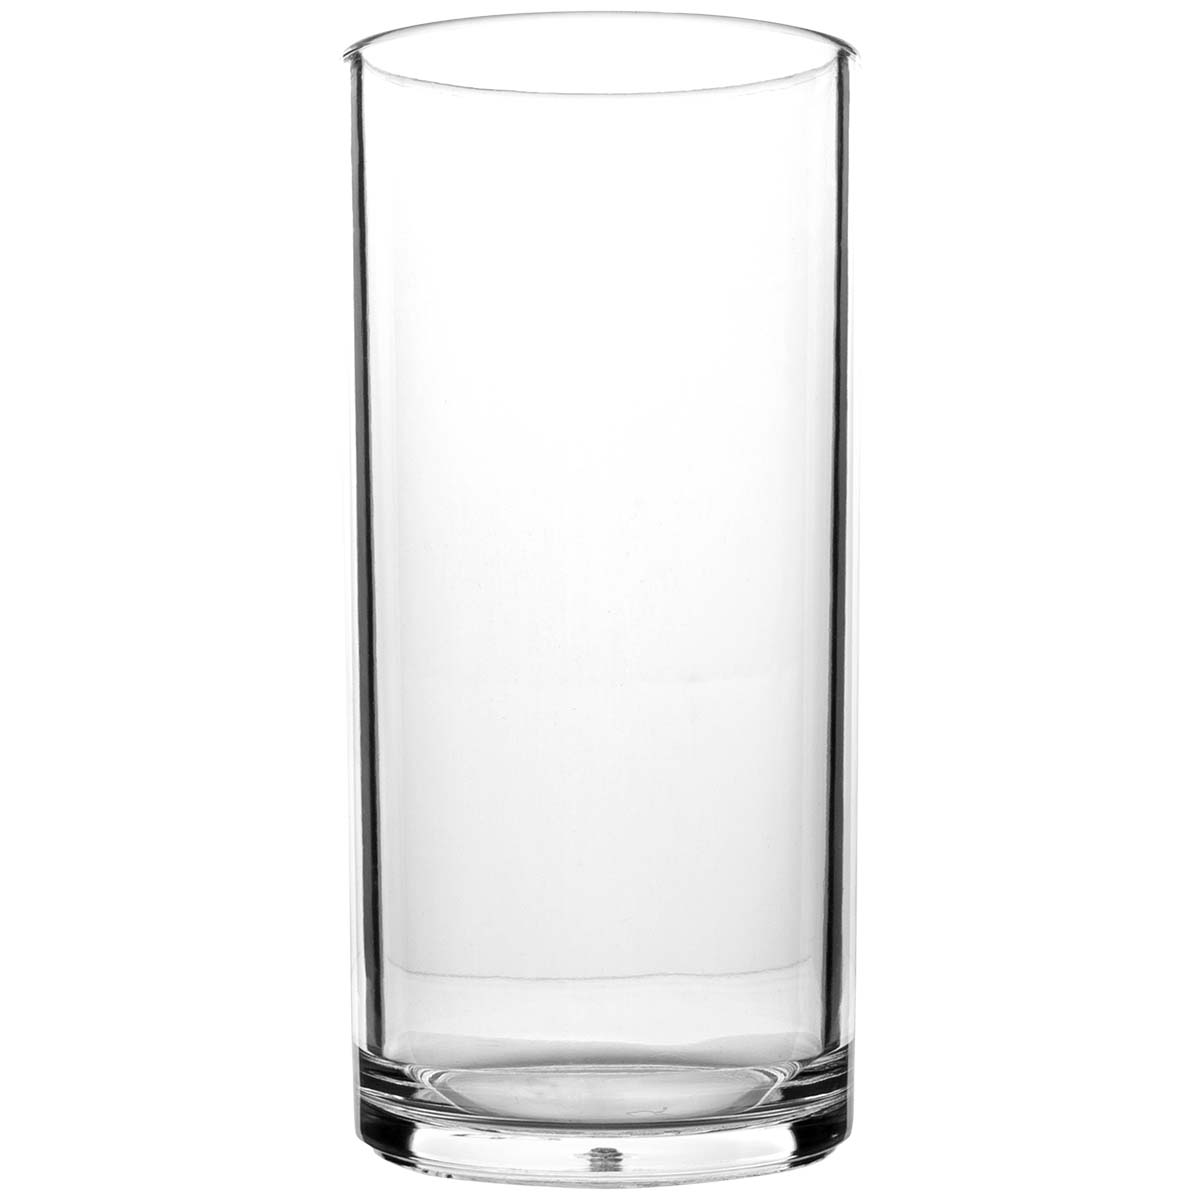 6101451 An extra sturdy and luxurious set of longdrink glasses. Made of 100% polycarbonate This makes the glasses almost unbreakable, light weight and scratch proof. The glasses are also dishwasher safe. Packed in units of 2.